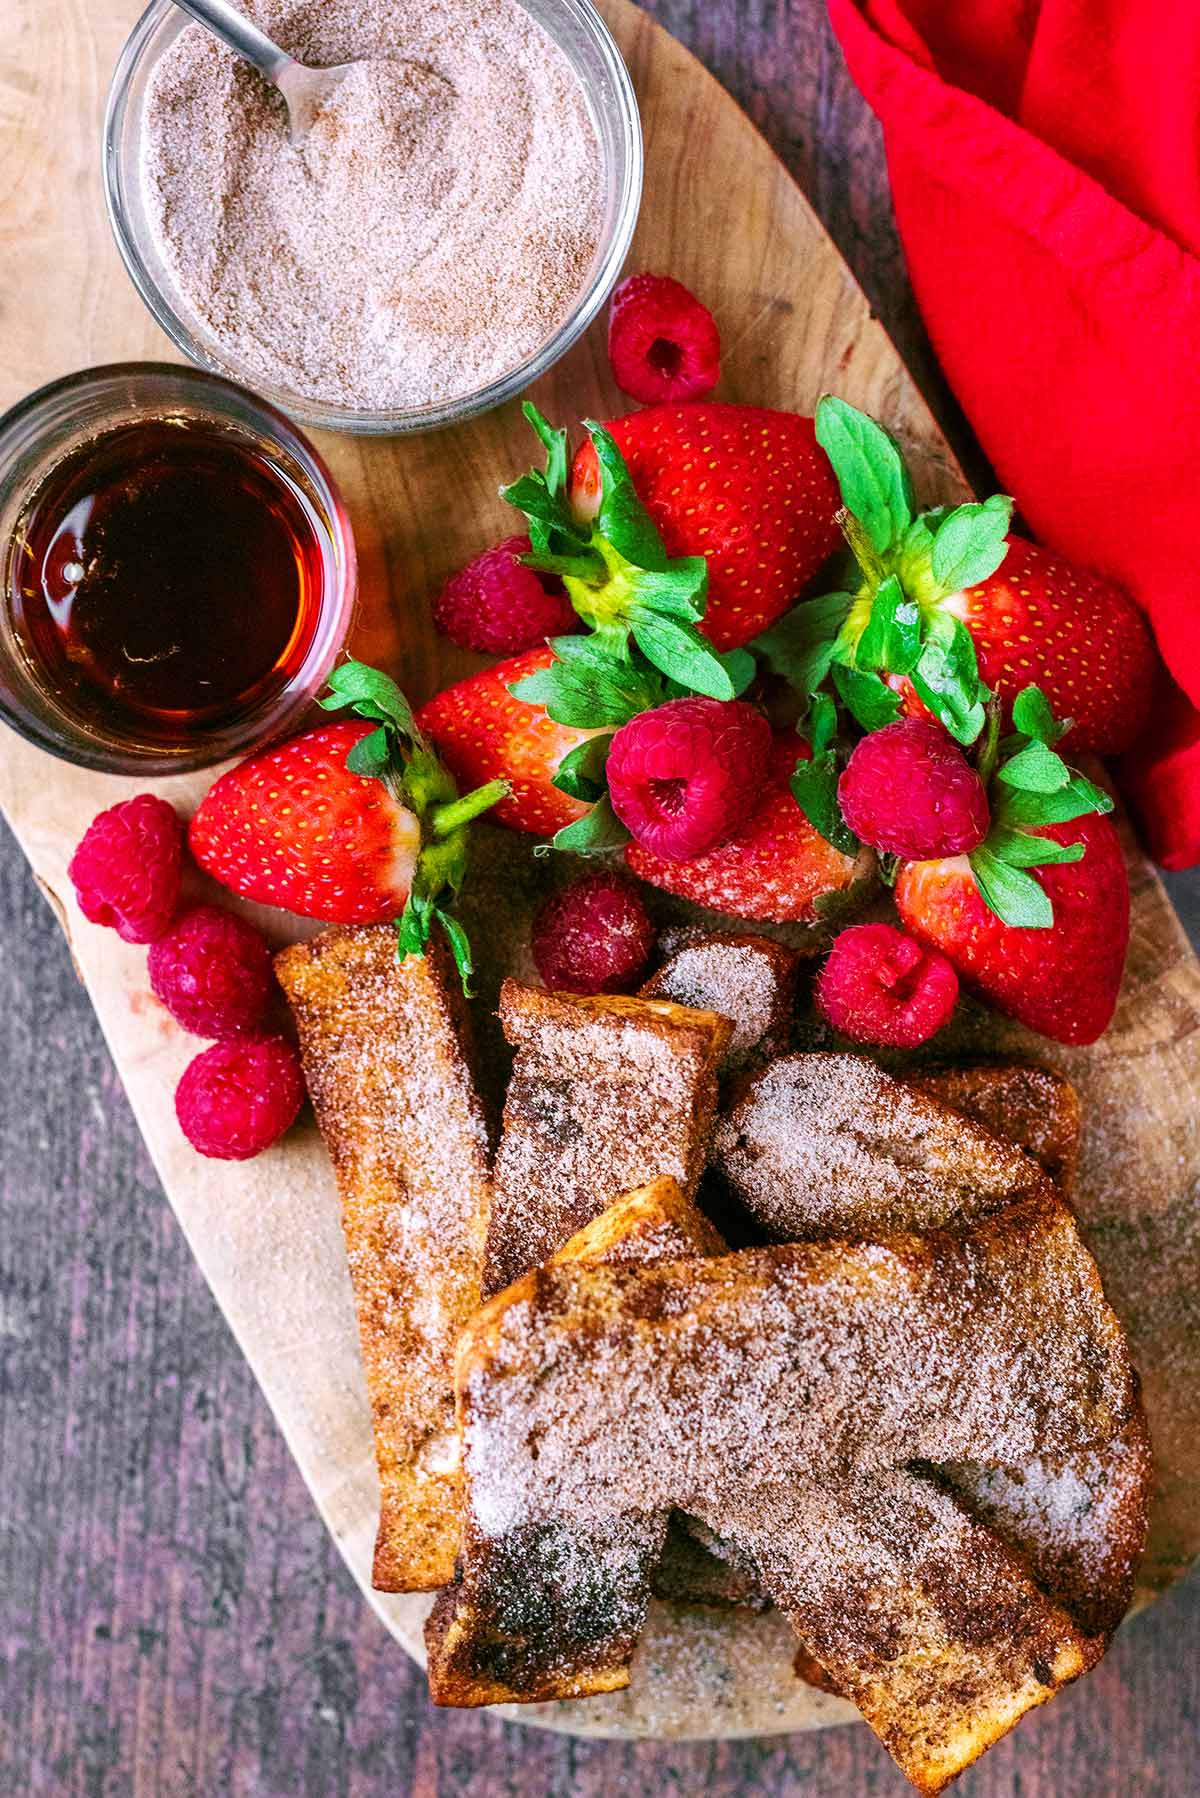 Sugar topped french toast on a board with strawberries and raspberries.